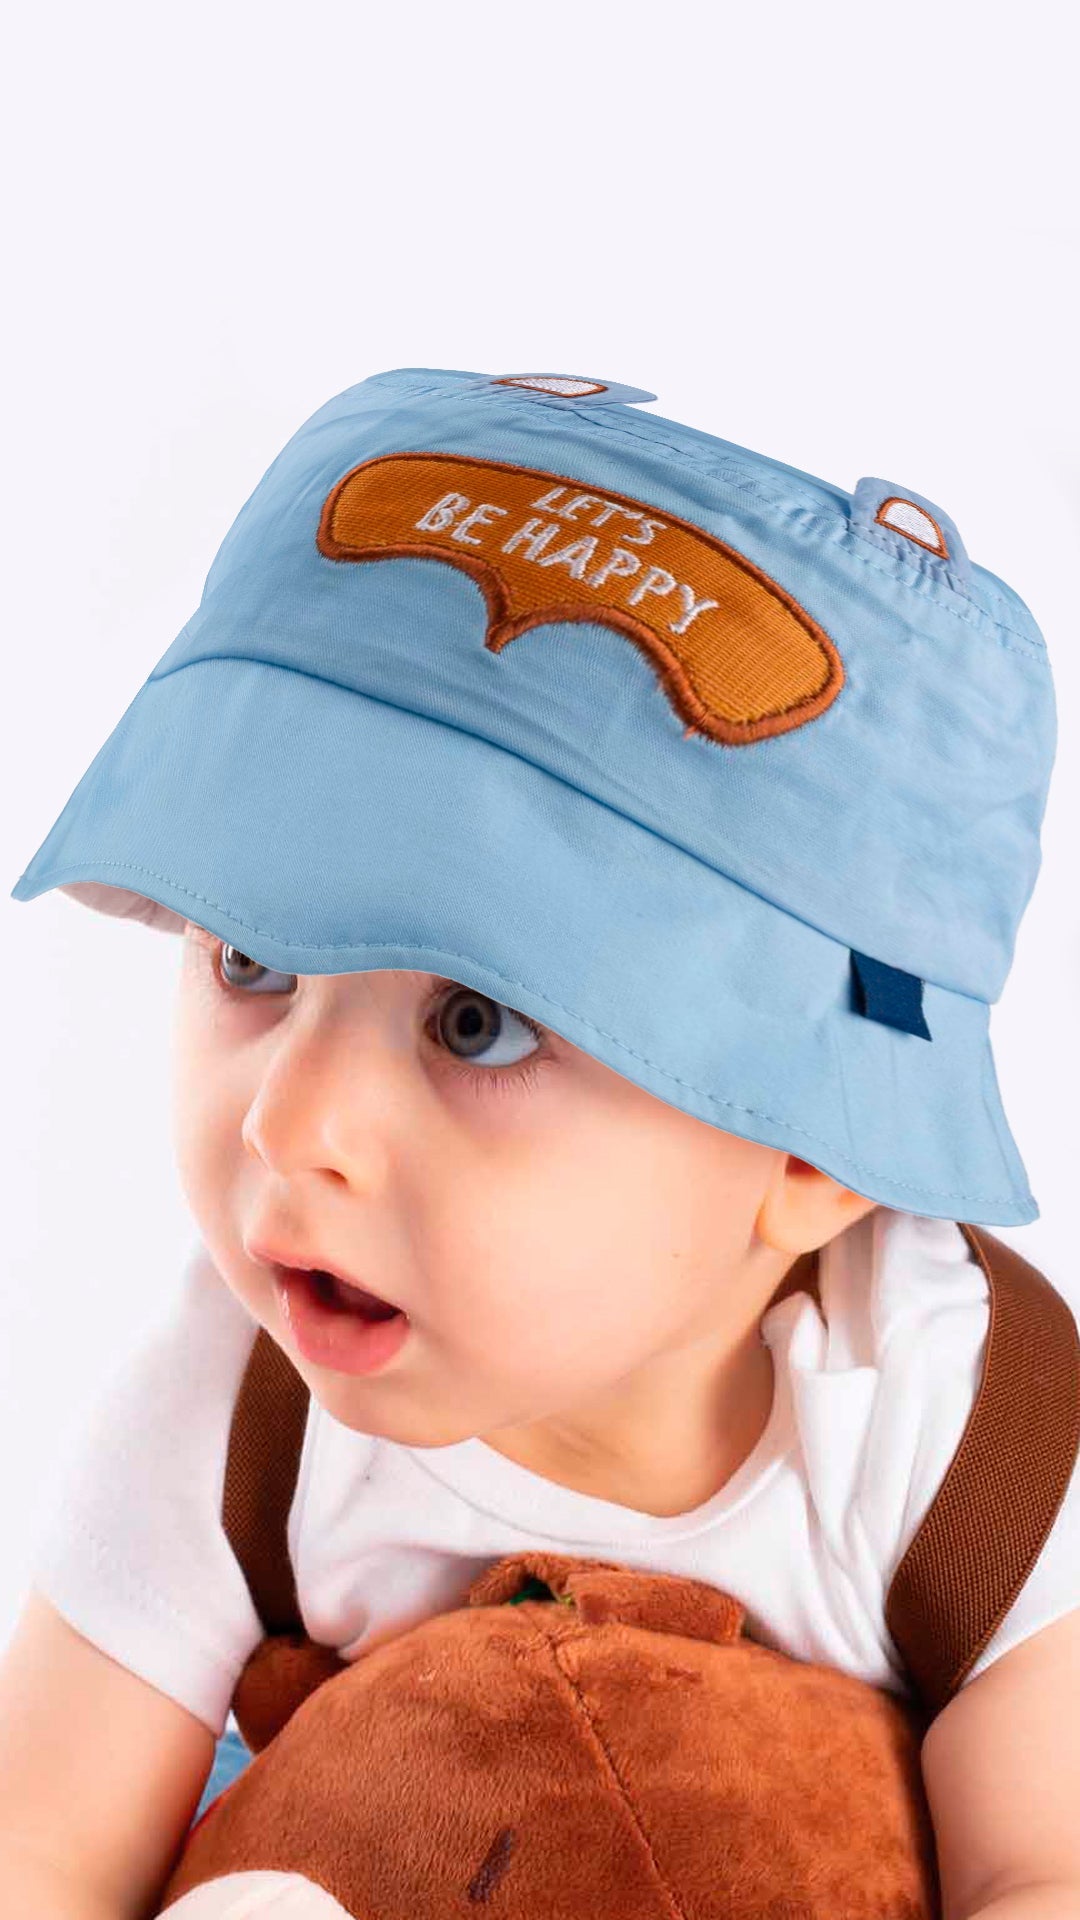 Let'S Be Happy 1-3 Years Old-Baby Bucket Hat